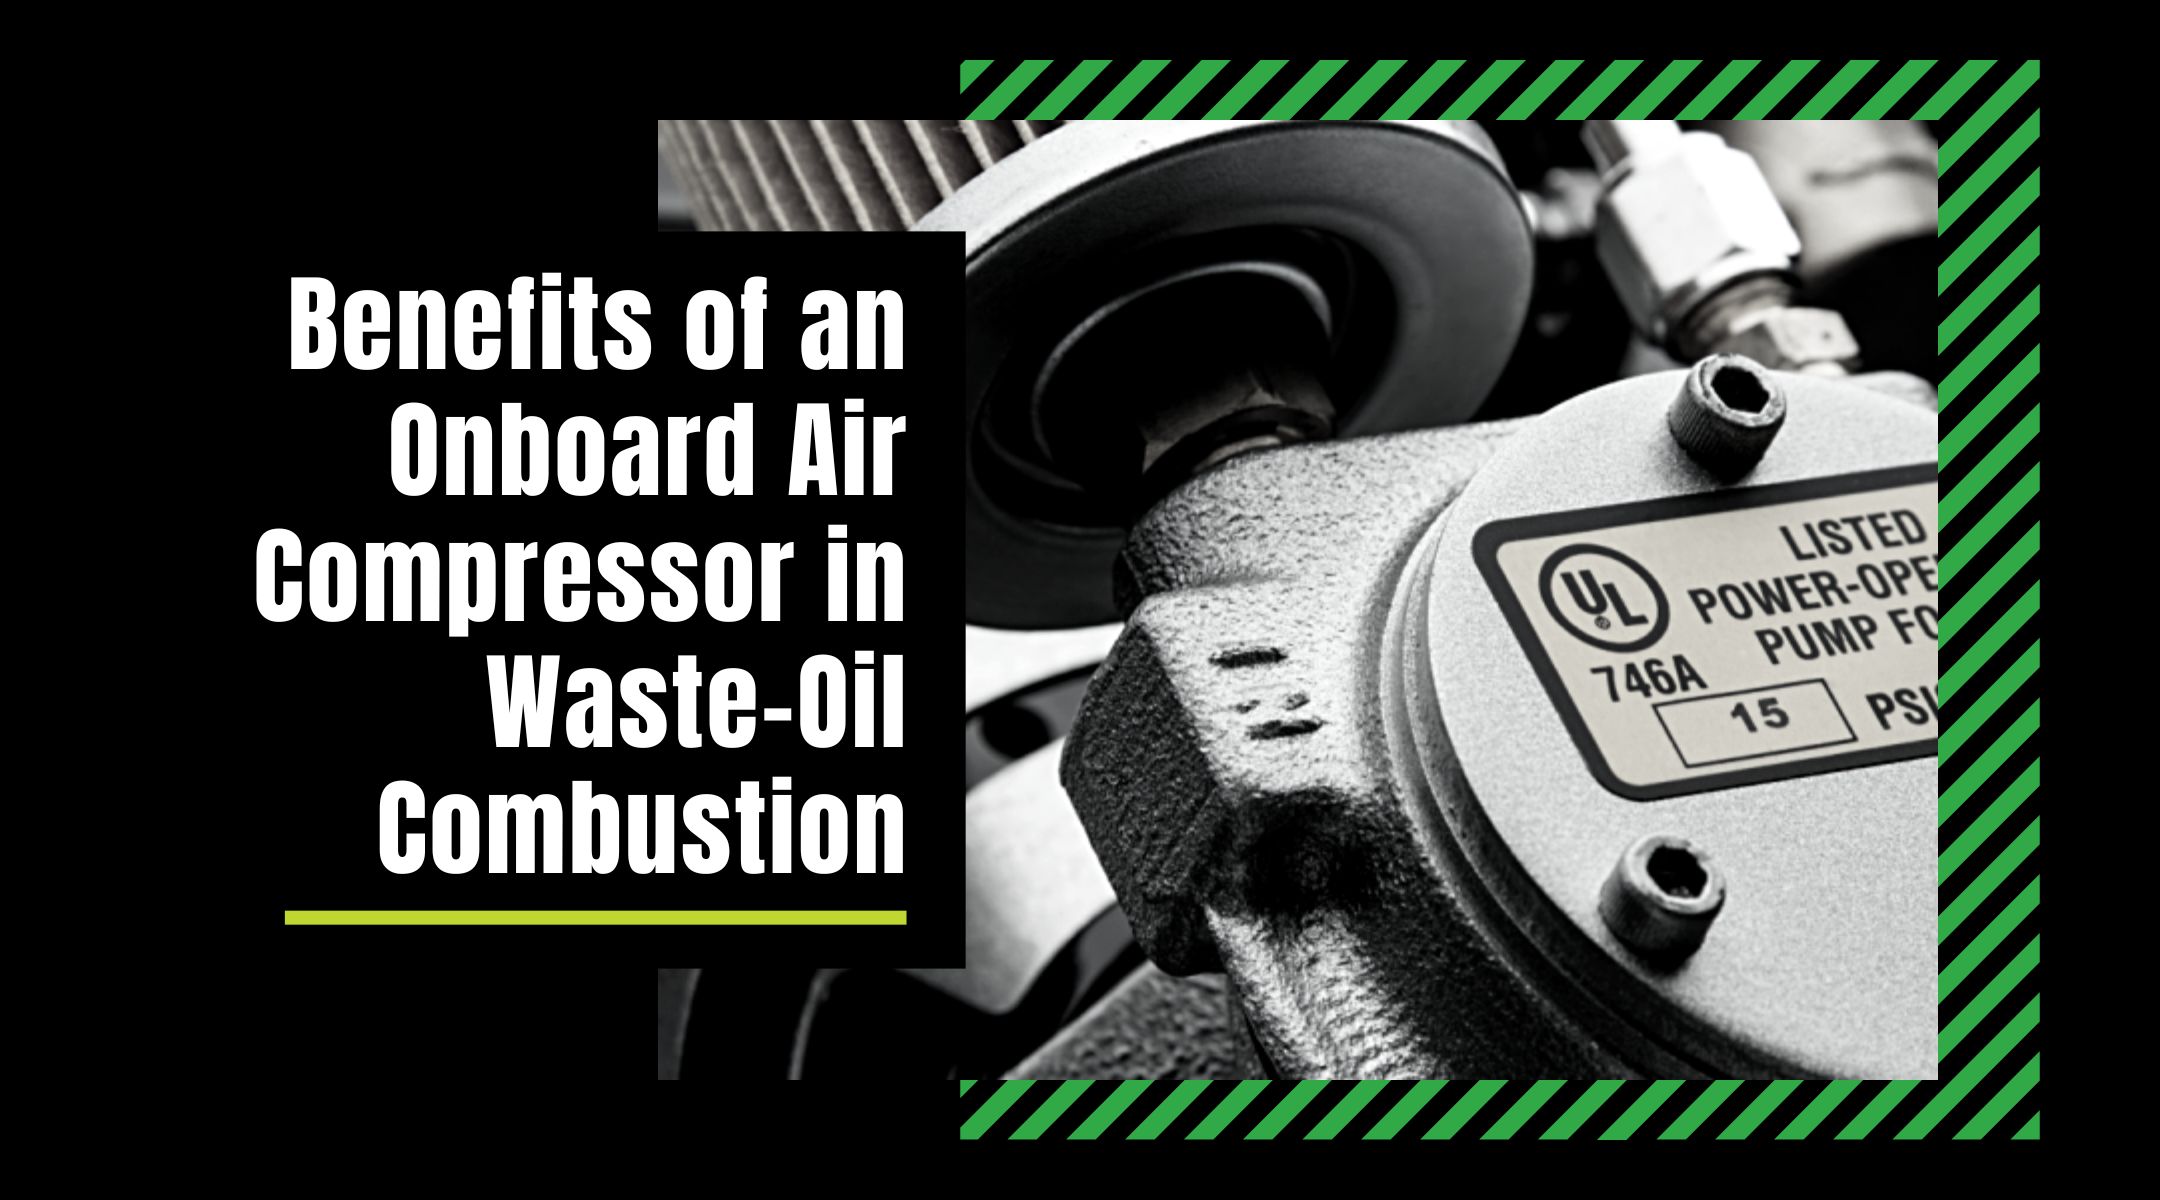 Benefits of an Onboard Air Compressor in Waste-Oil Combustion